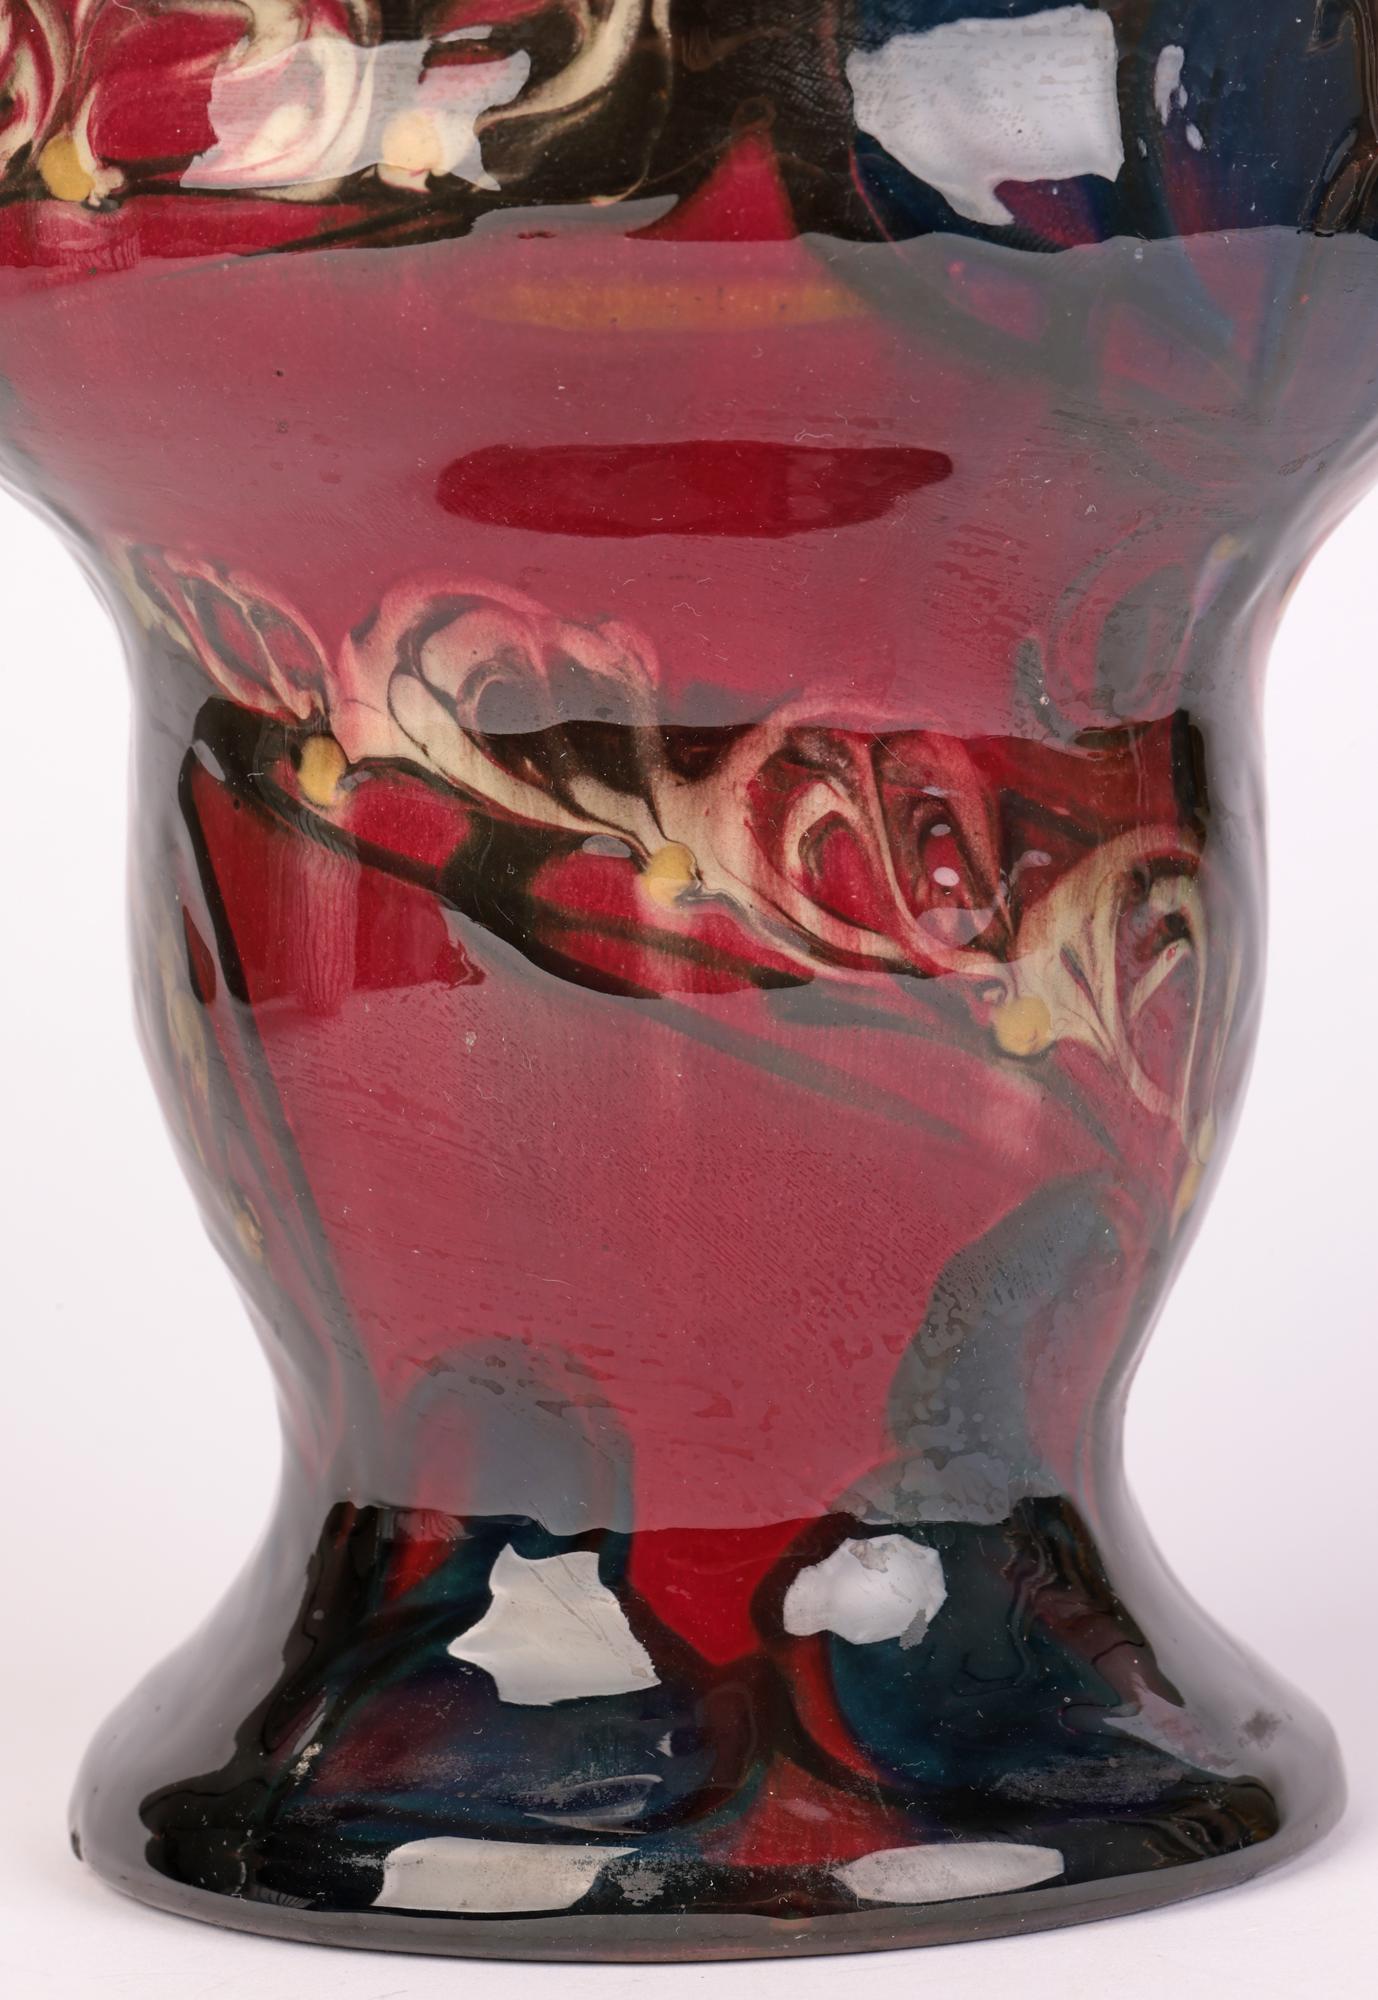 An exceptional and scarce Danish Art Nouveau abstract stylized floral decorated vase by Eiler Londal for Danico and dating between 1900 and 1929 believed to be an early example. This stylish and unusual shaped vase stands on a wide skirted with a